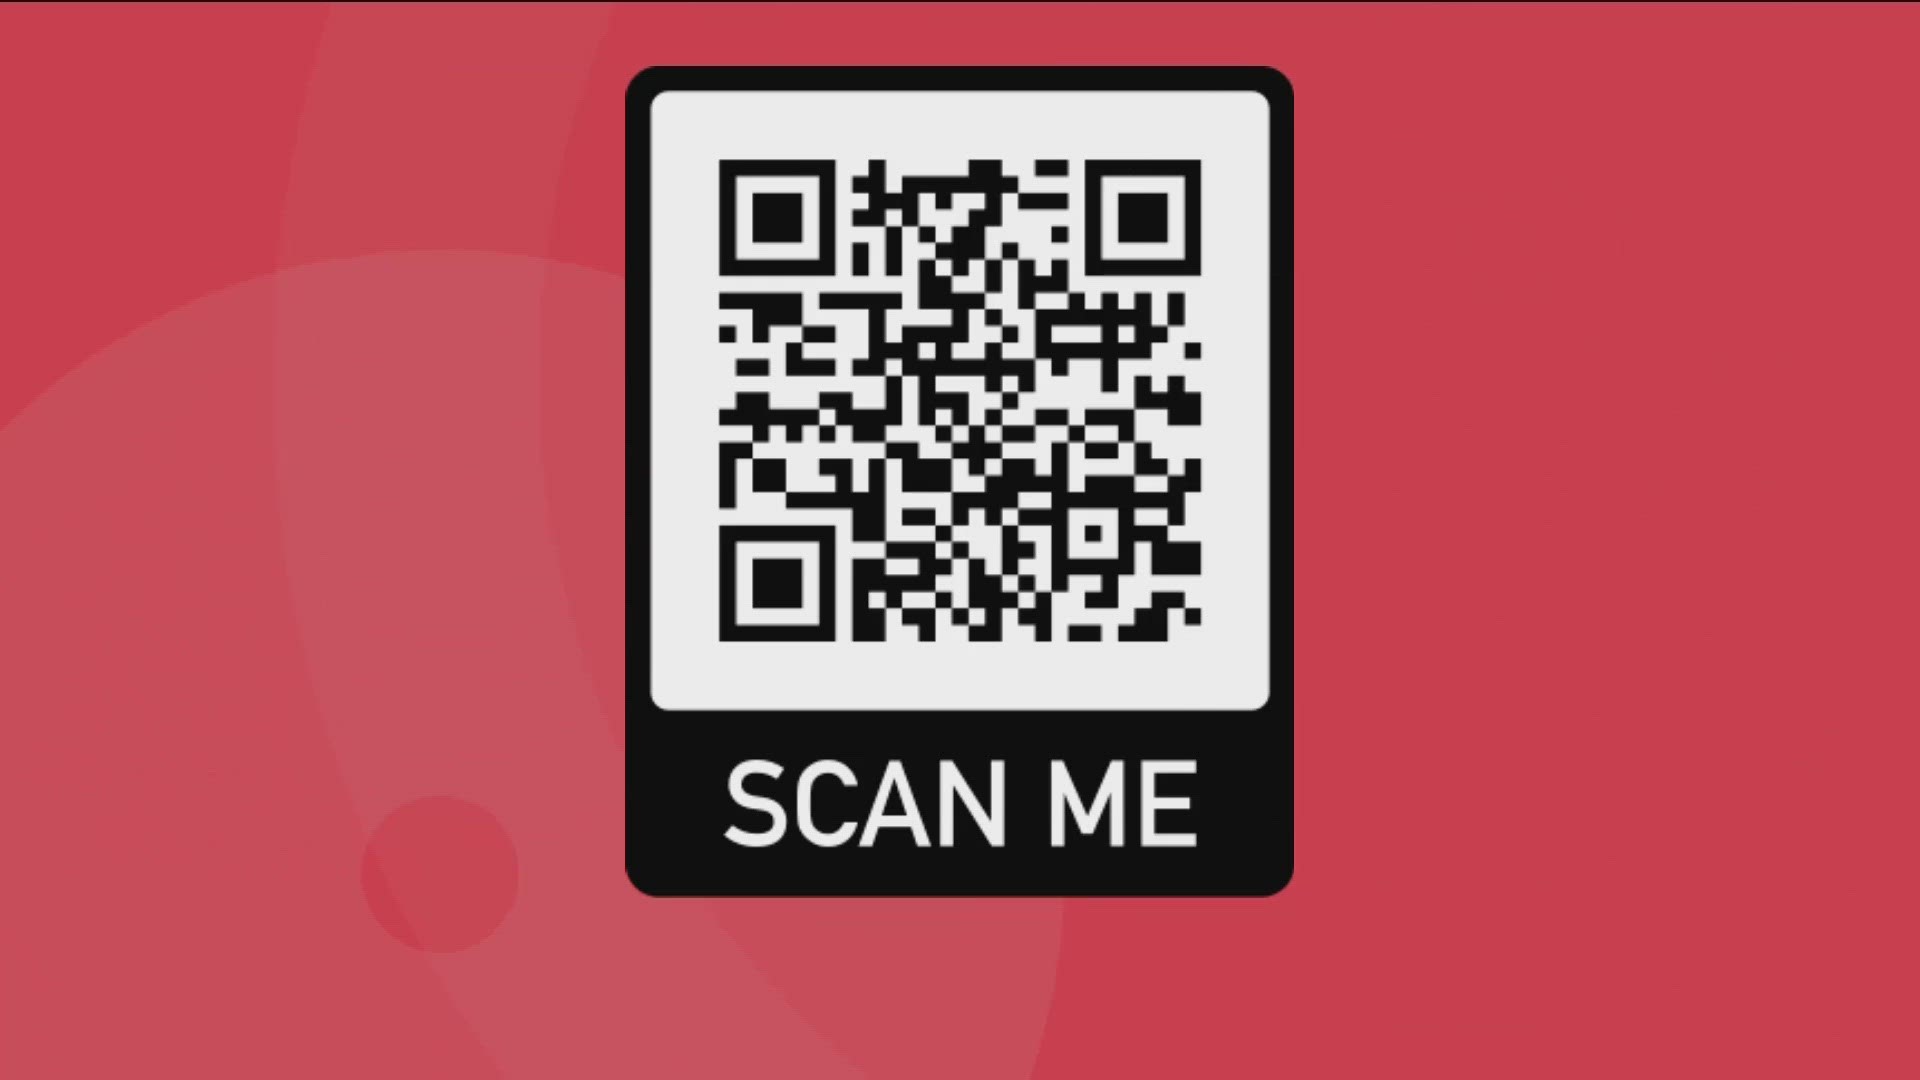 Follow Lacey and her team on their Race Across America in June. You can send a donation by scanning the QR code or at LoveSweatAndGears.net.